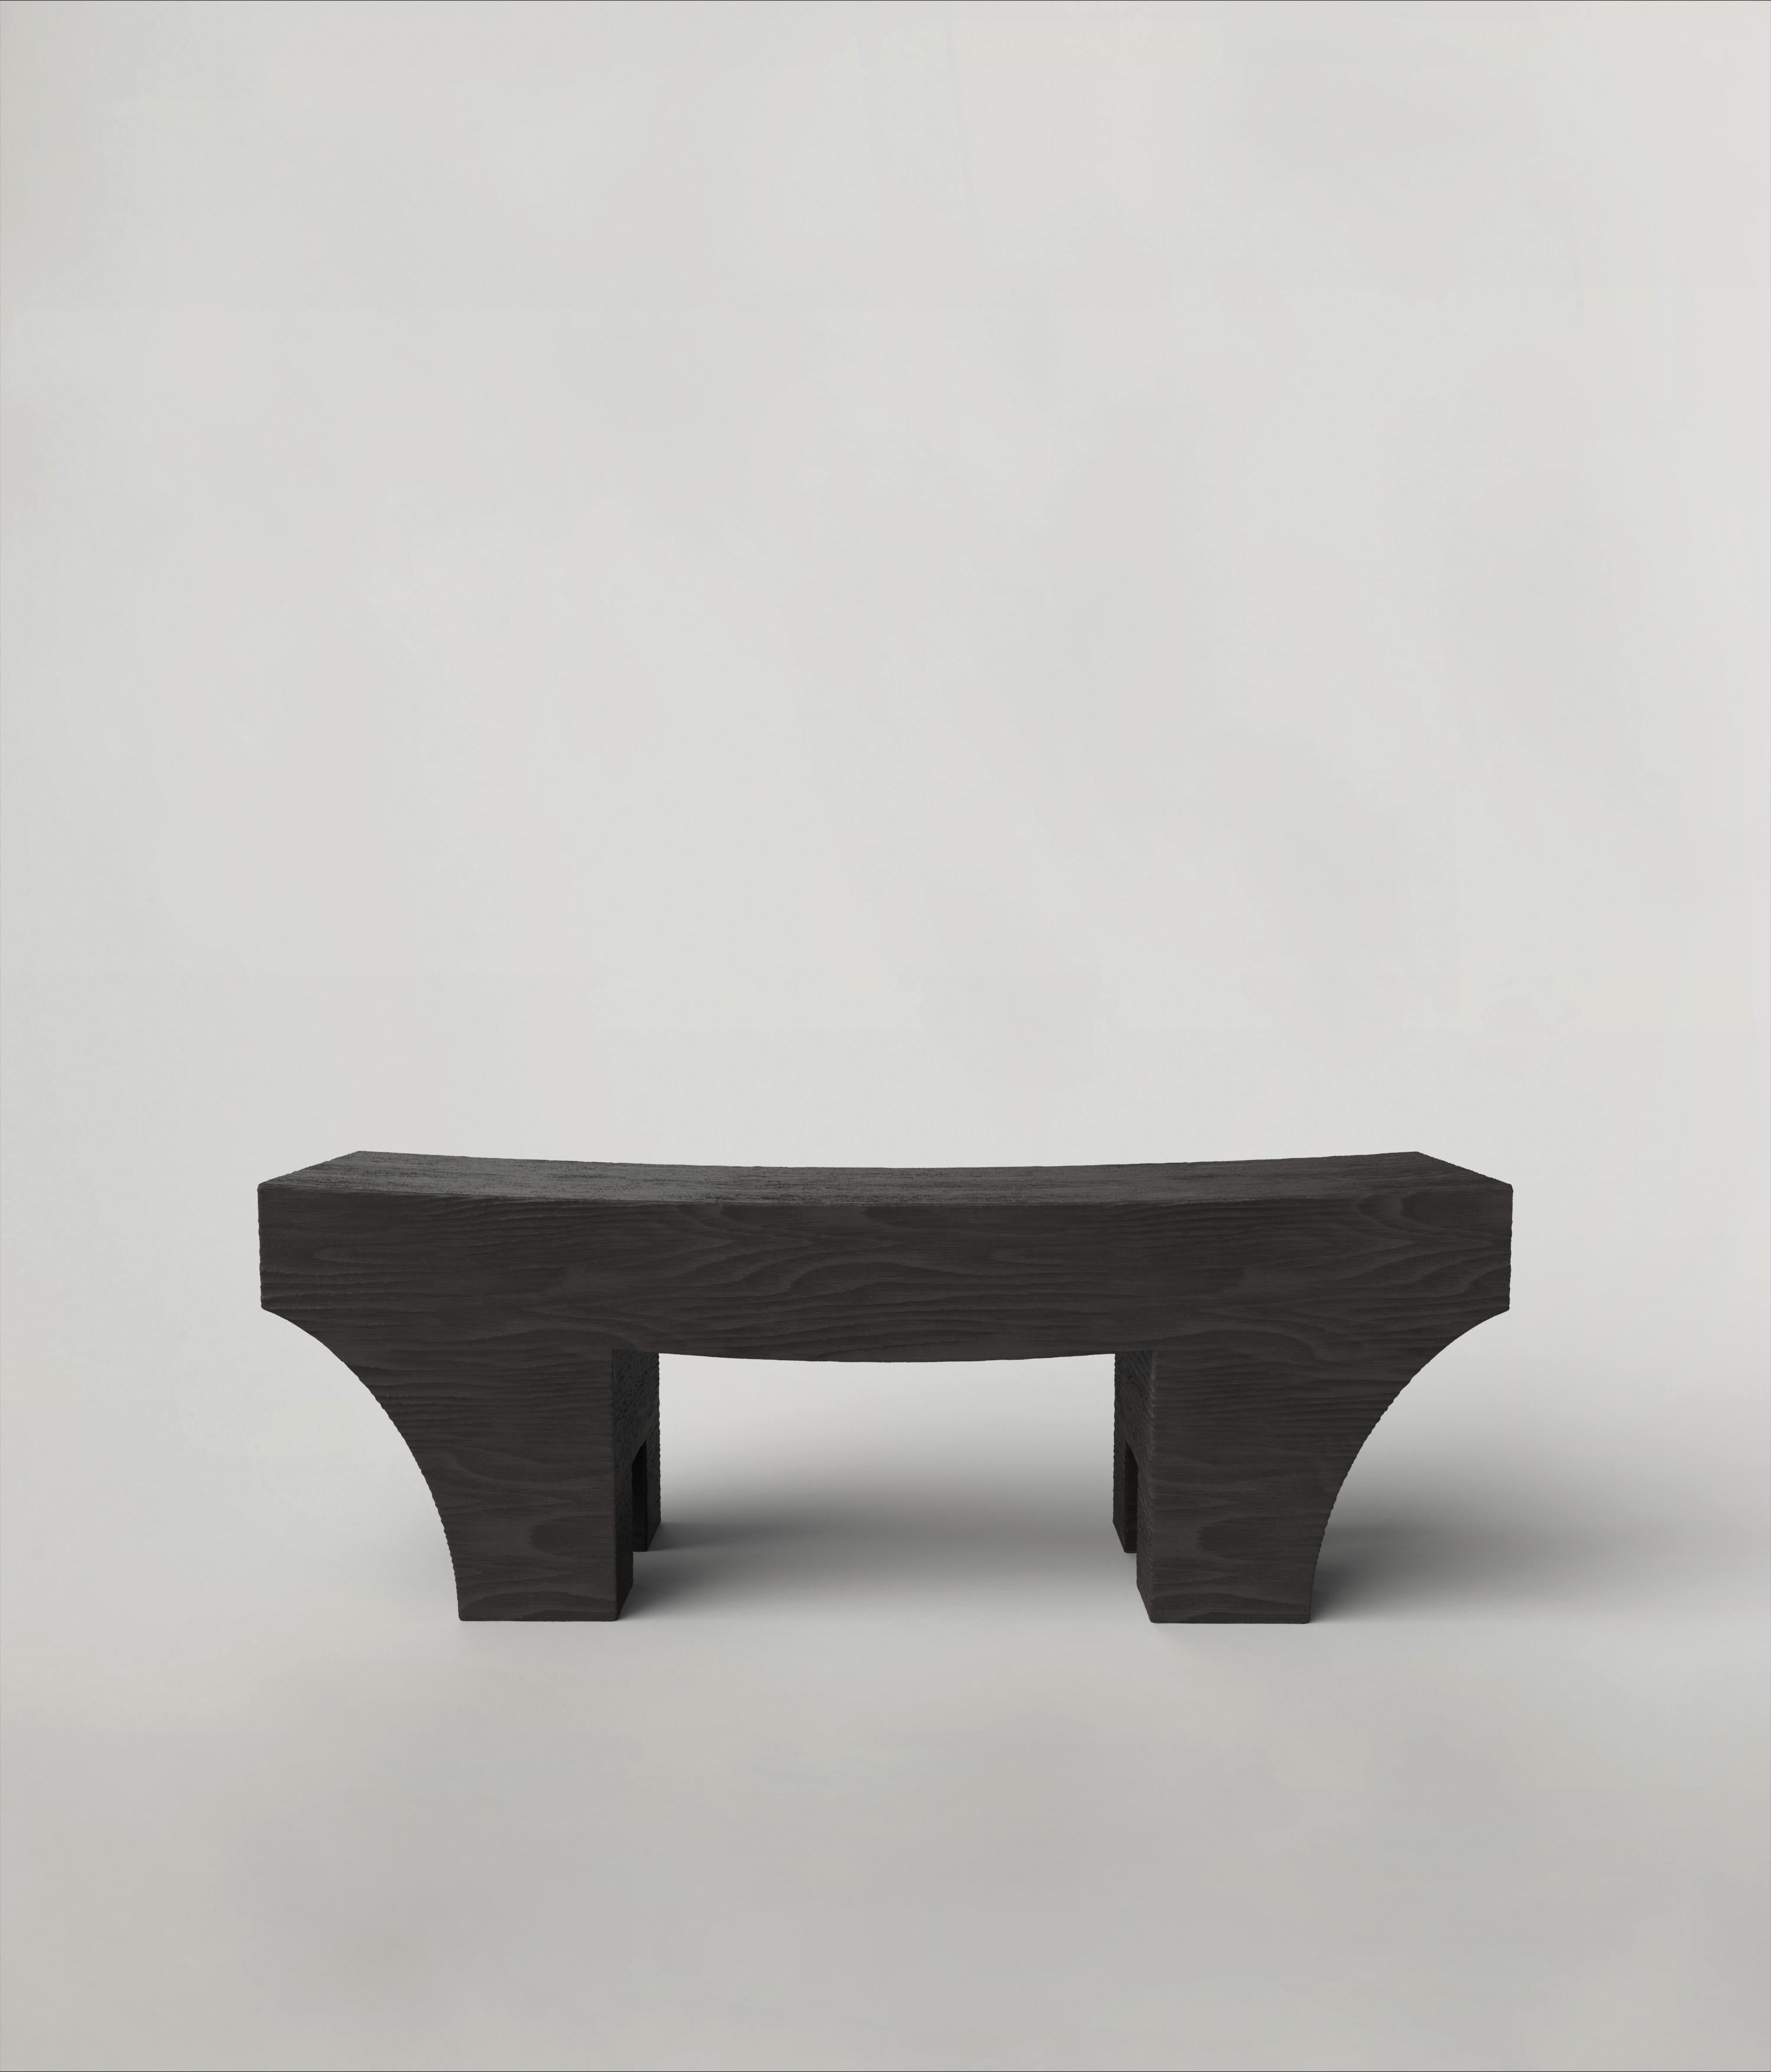 Woodwork Contemporary Limited Edition Signed Charred Bench, Mhono V2 by Edizione Limitata For Sale